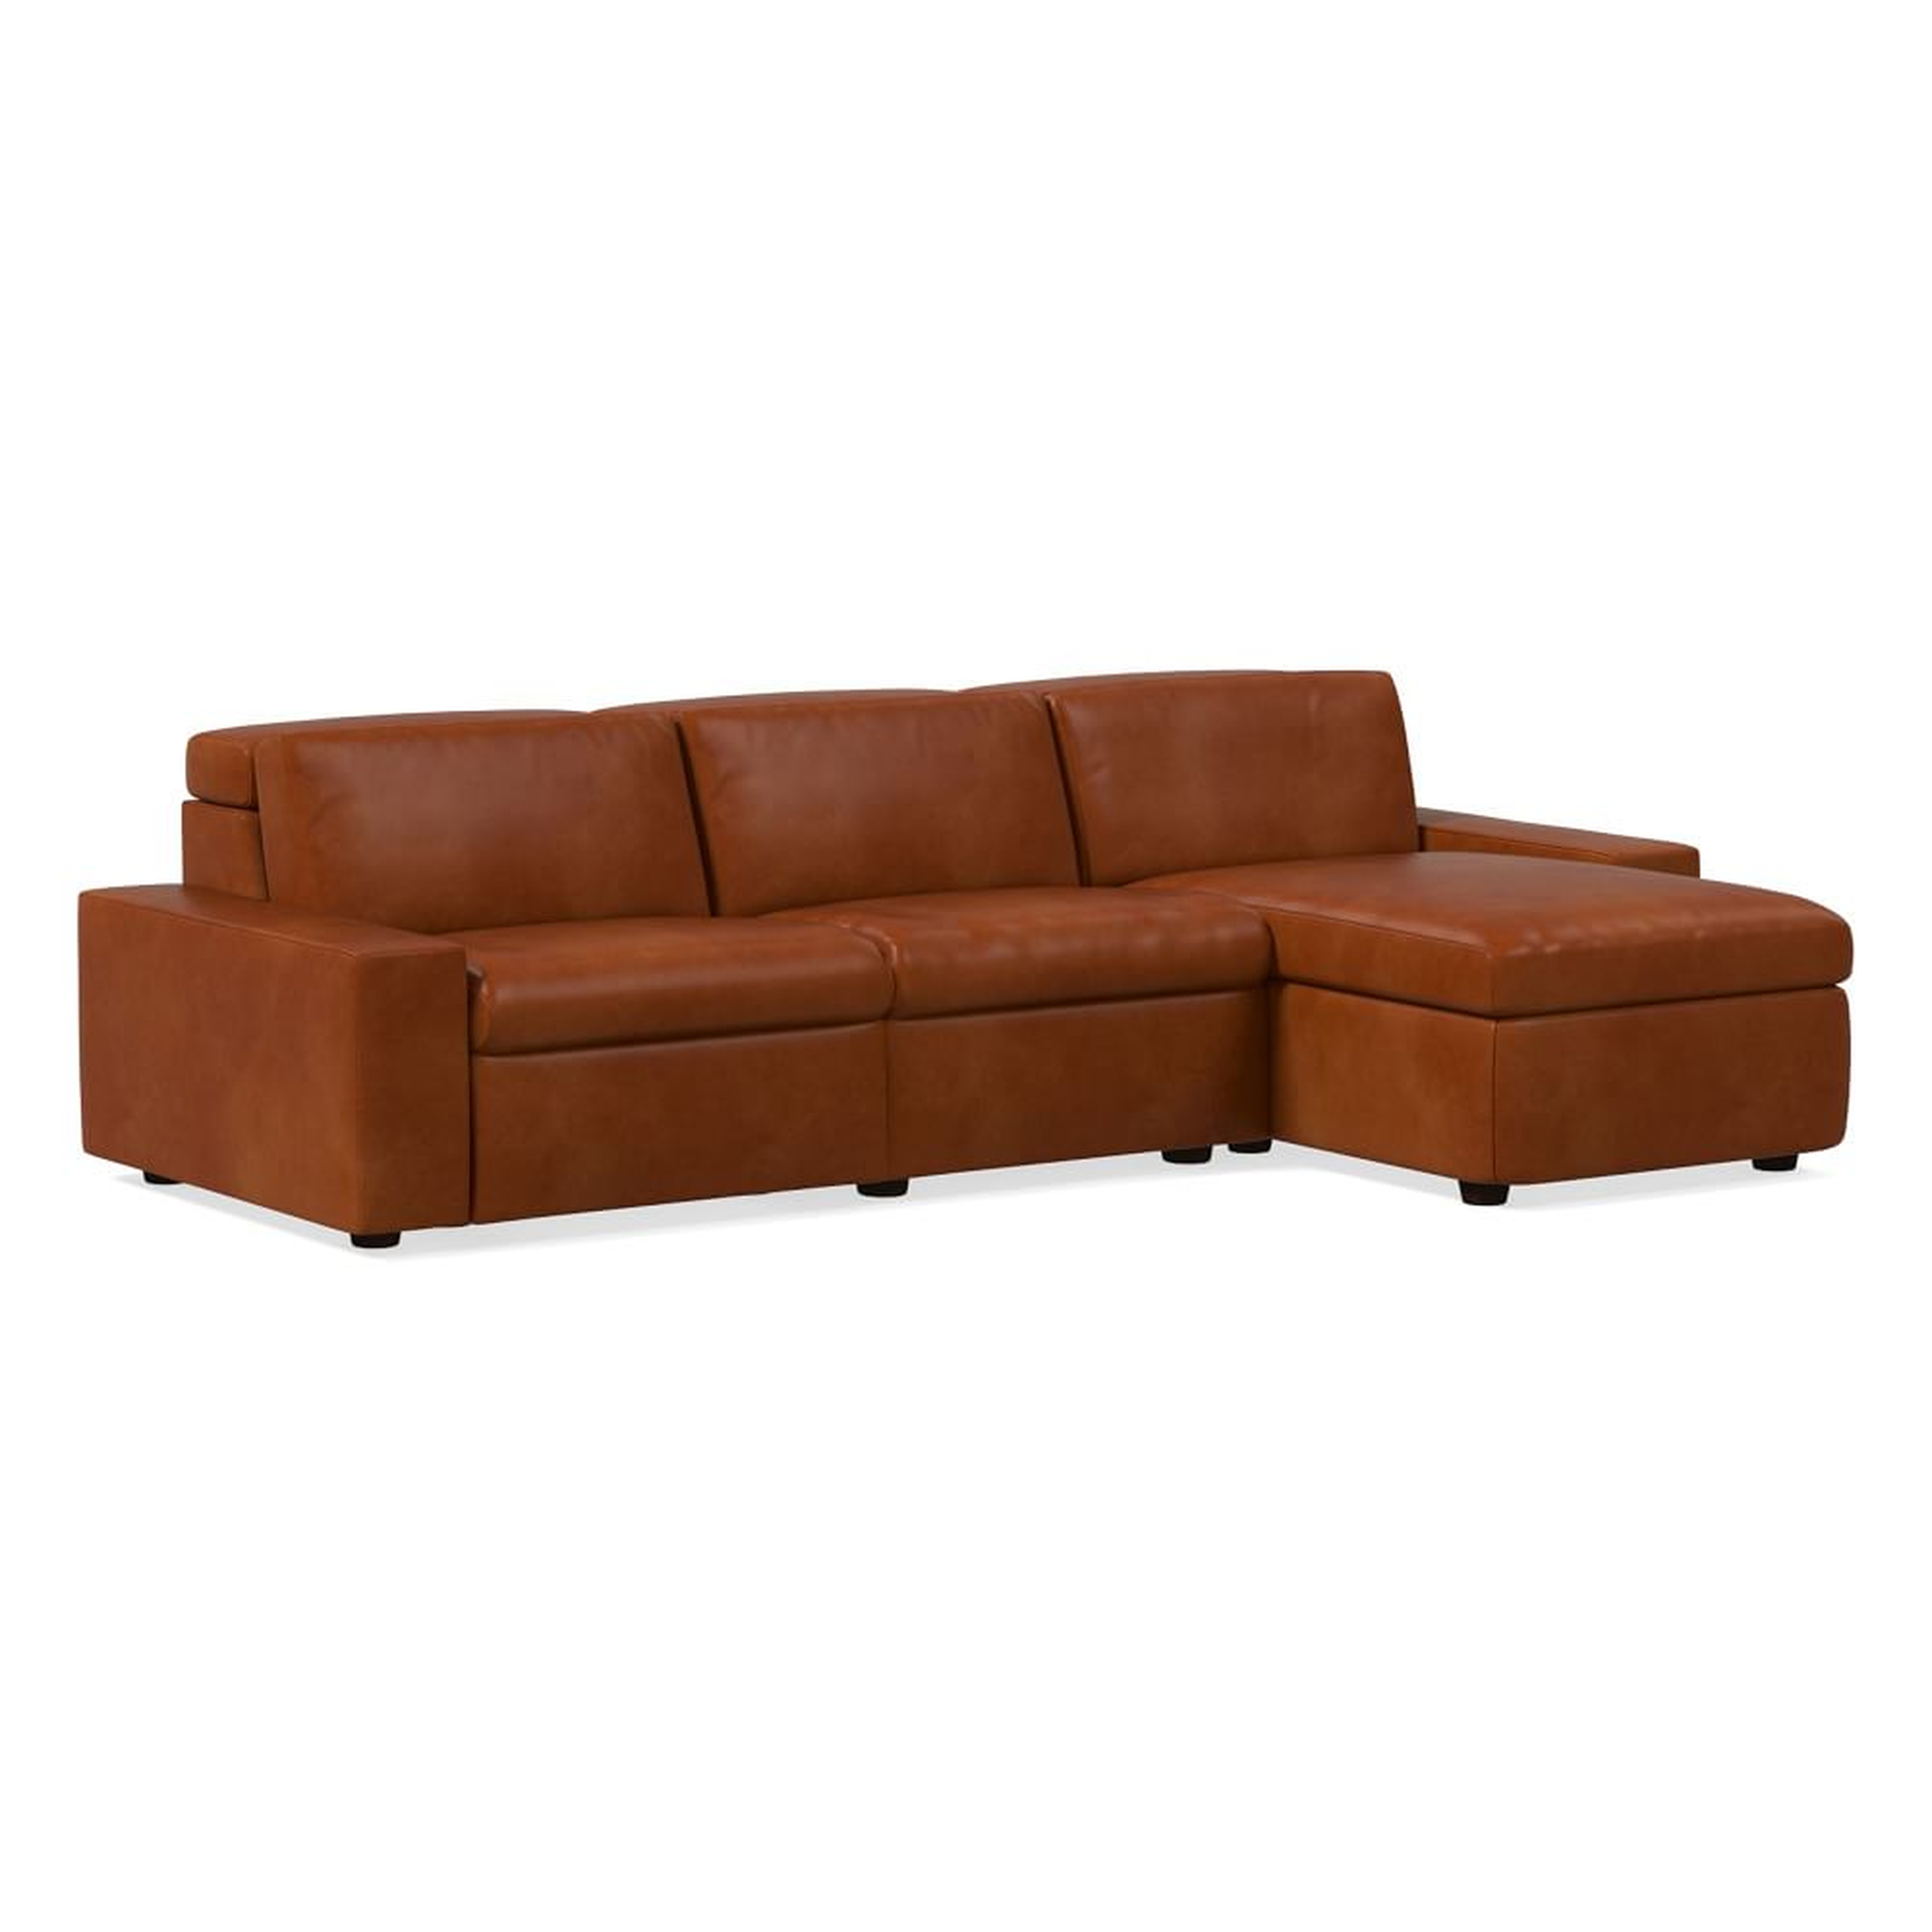 Enzo 108" 3-Piece Reclining Chaise Sectional w/ Storage, Two Basic Arms, Saddle Leather, Nut - West Elm